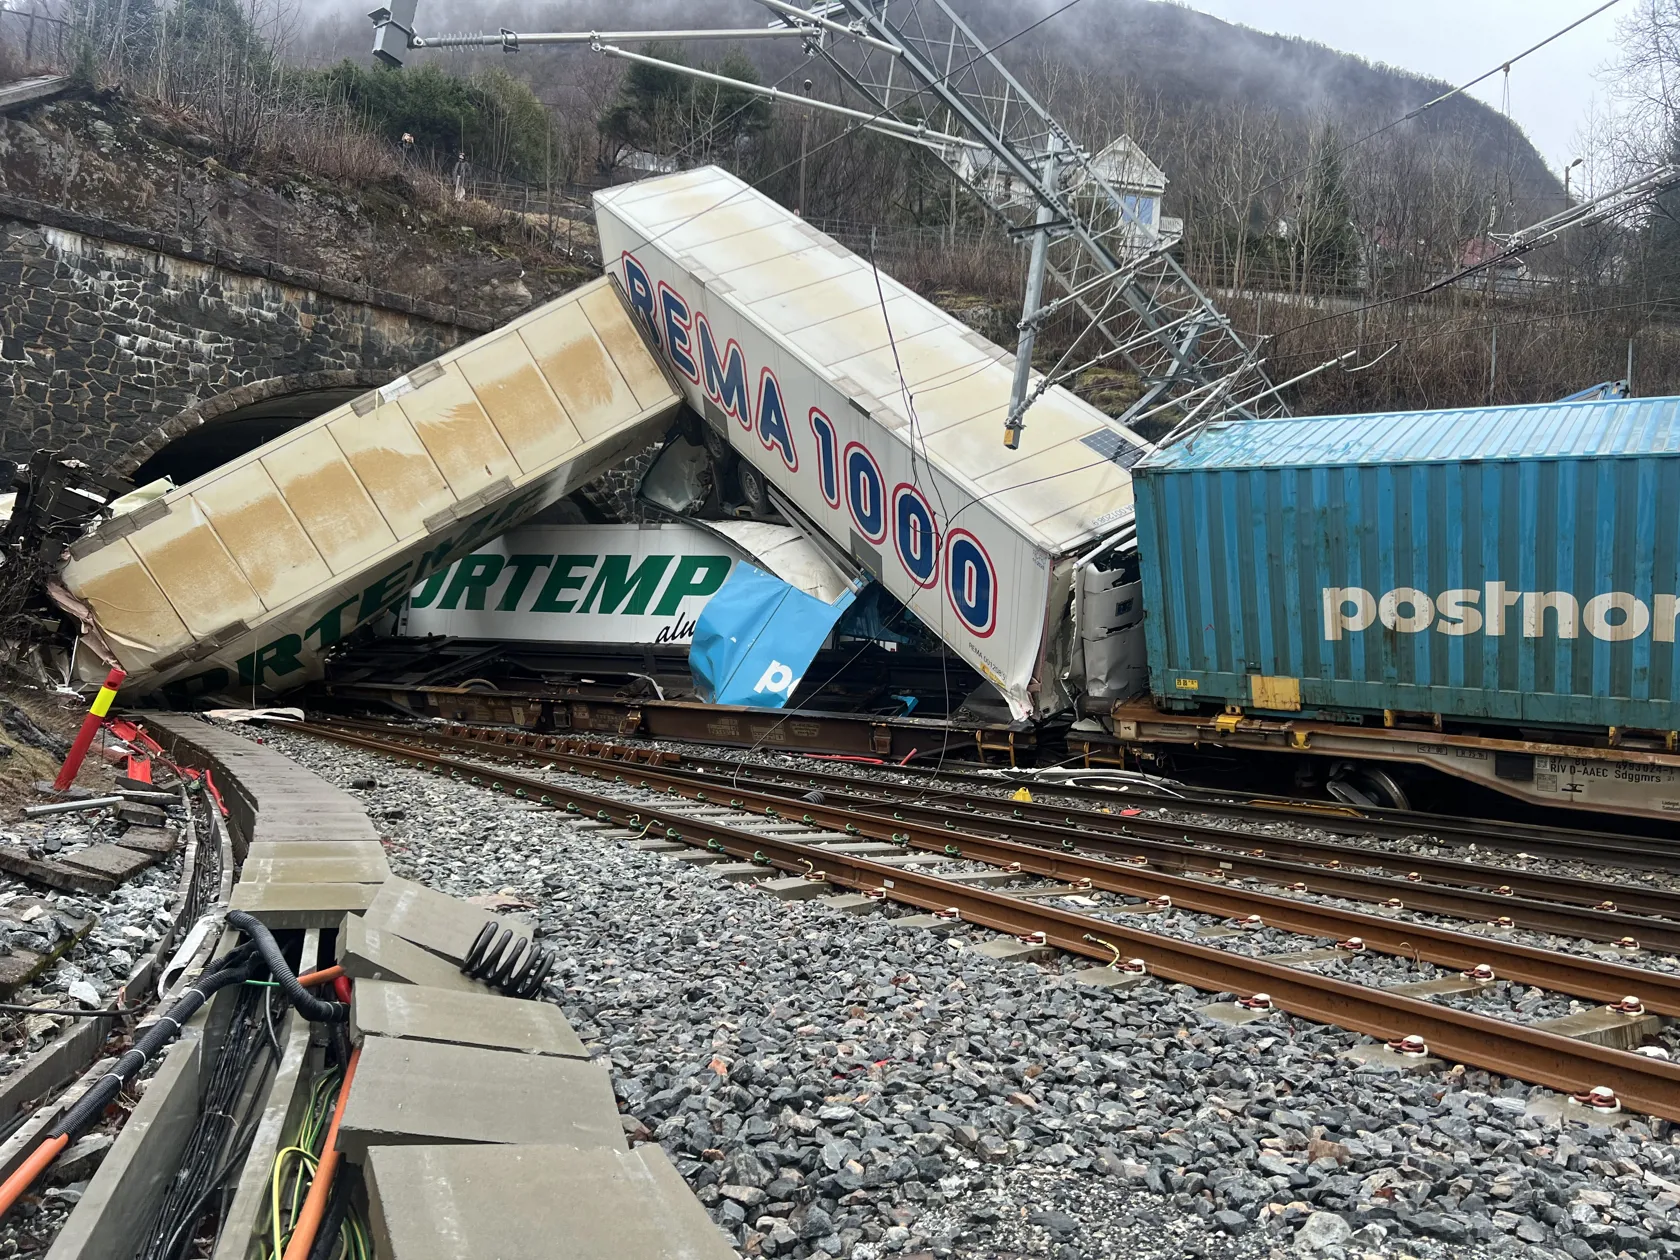 Derailed freight cars (Photo: Bane NOR)